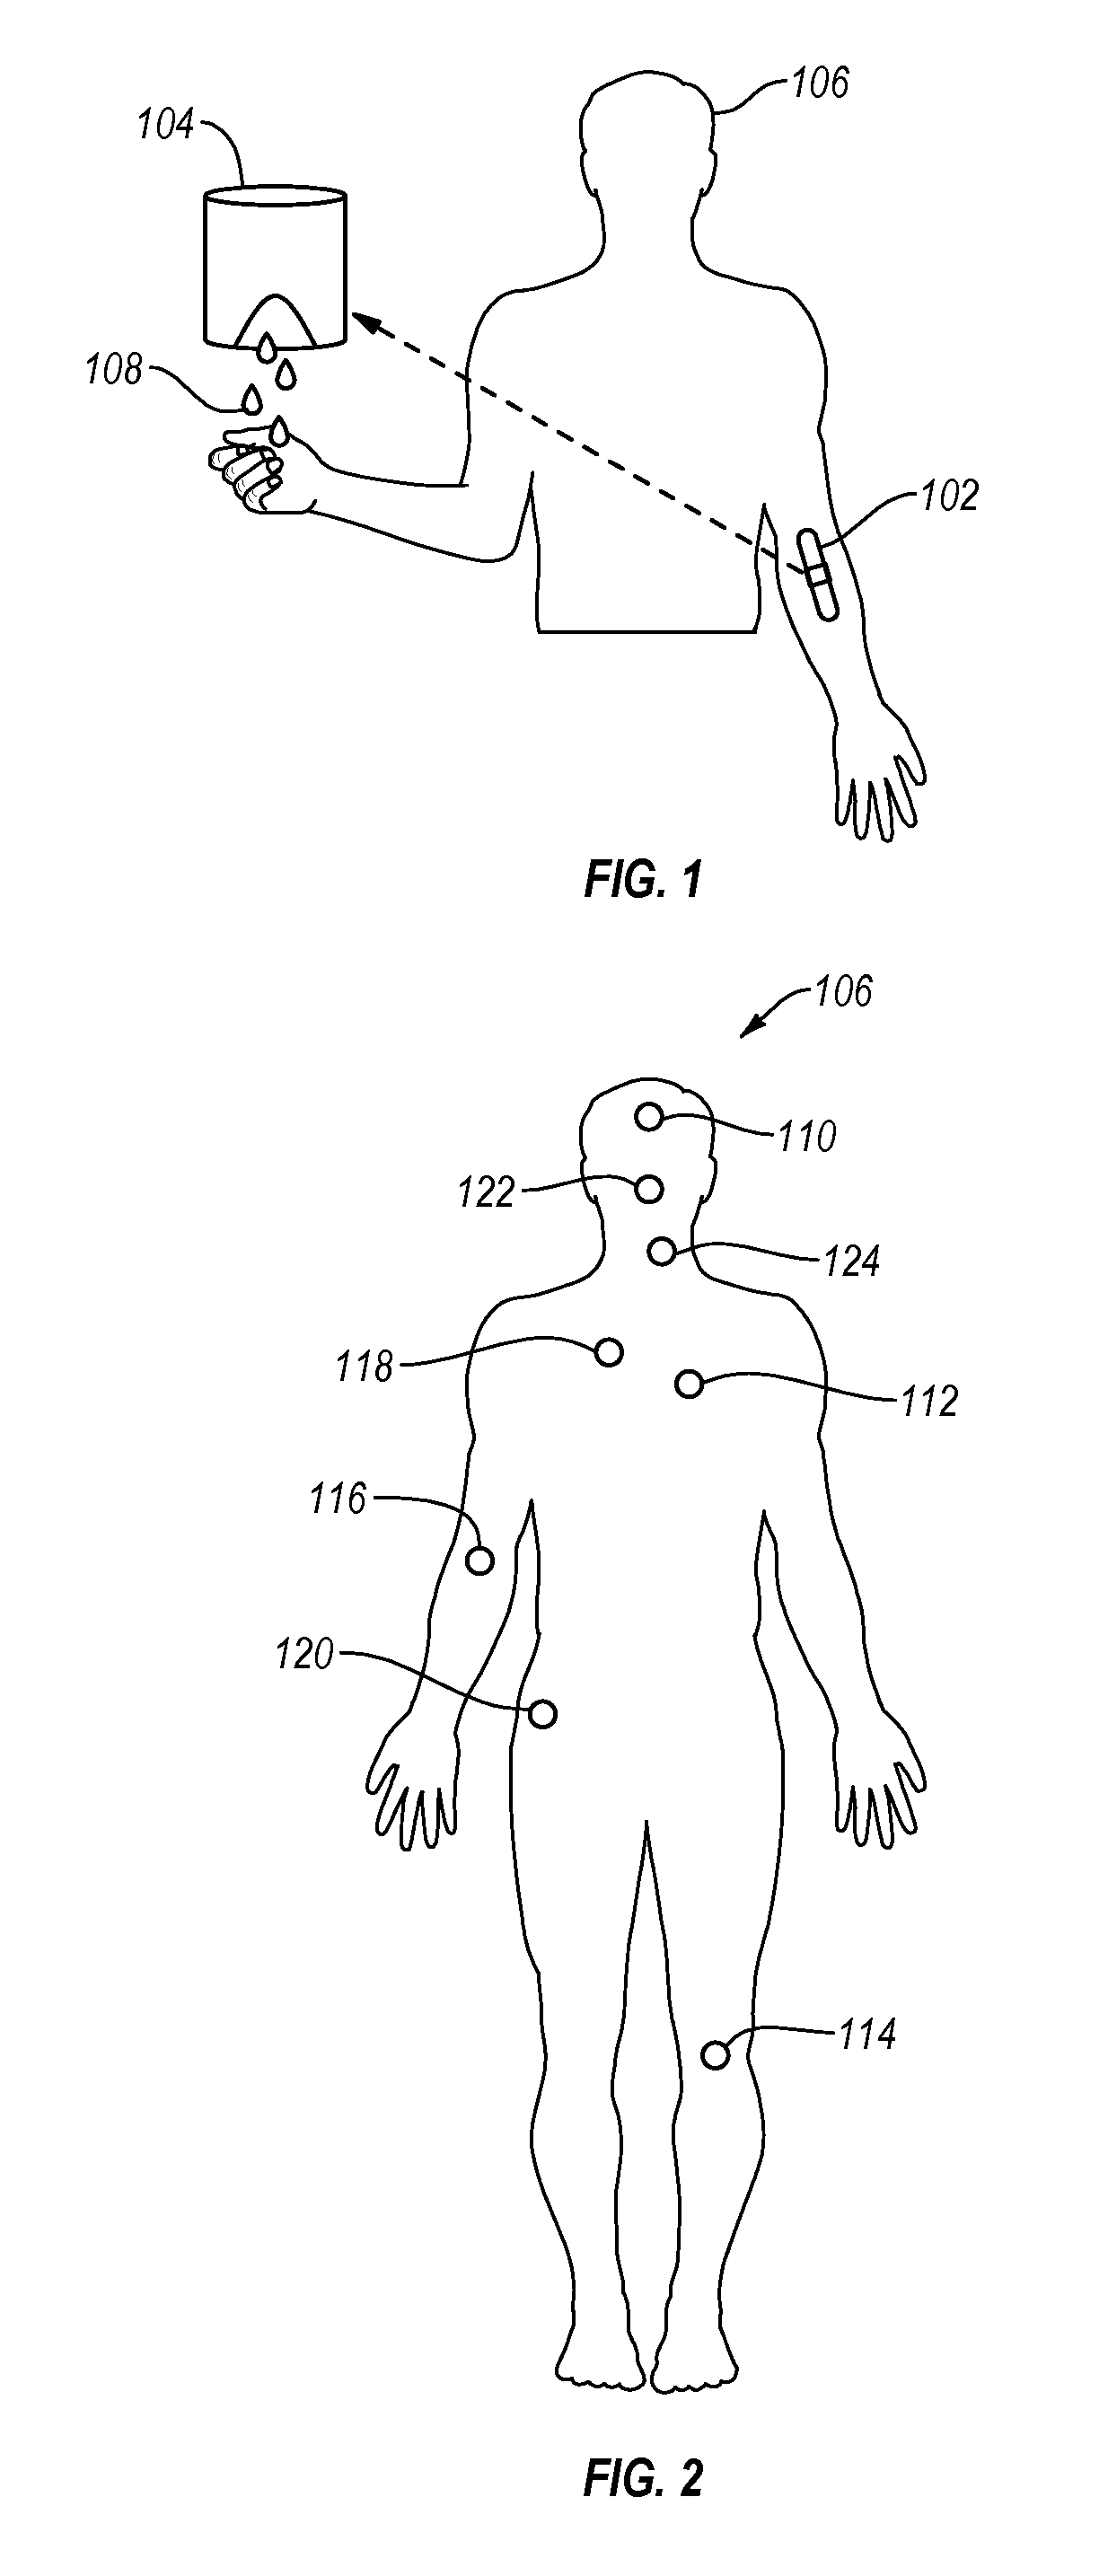 Systems, methods, and devices for dispensing one or more substances